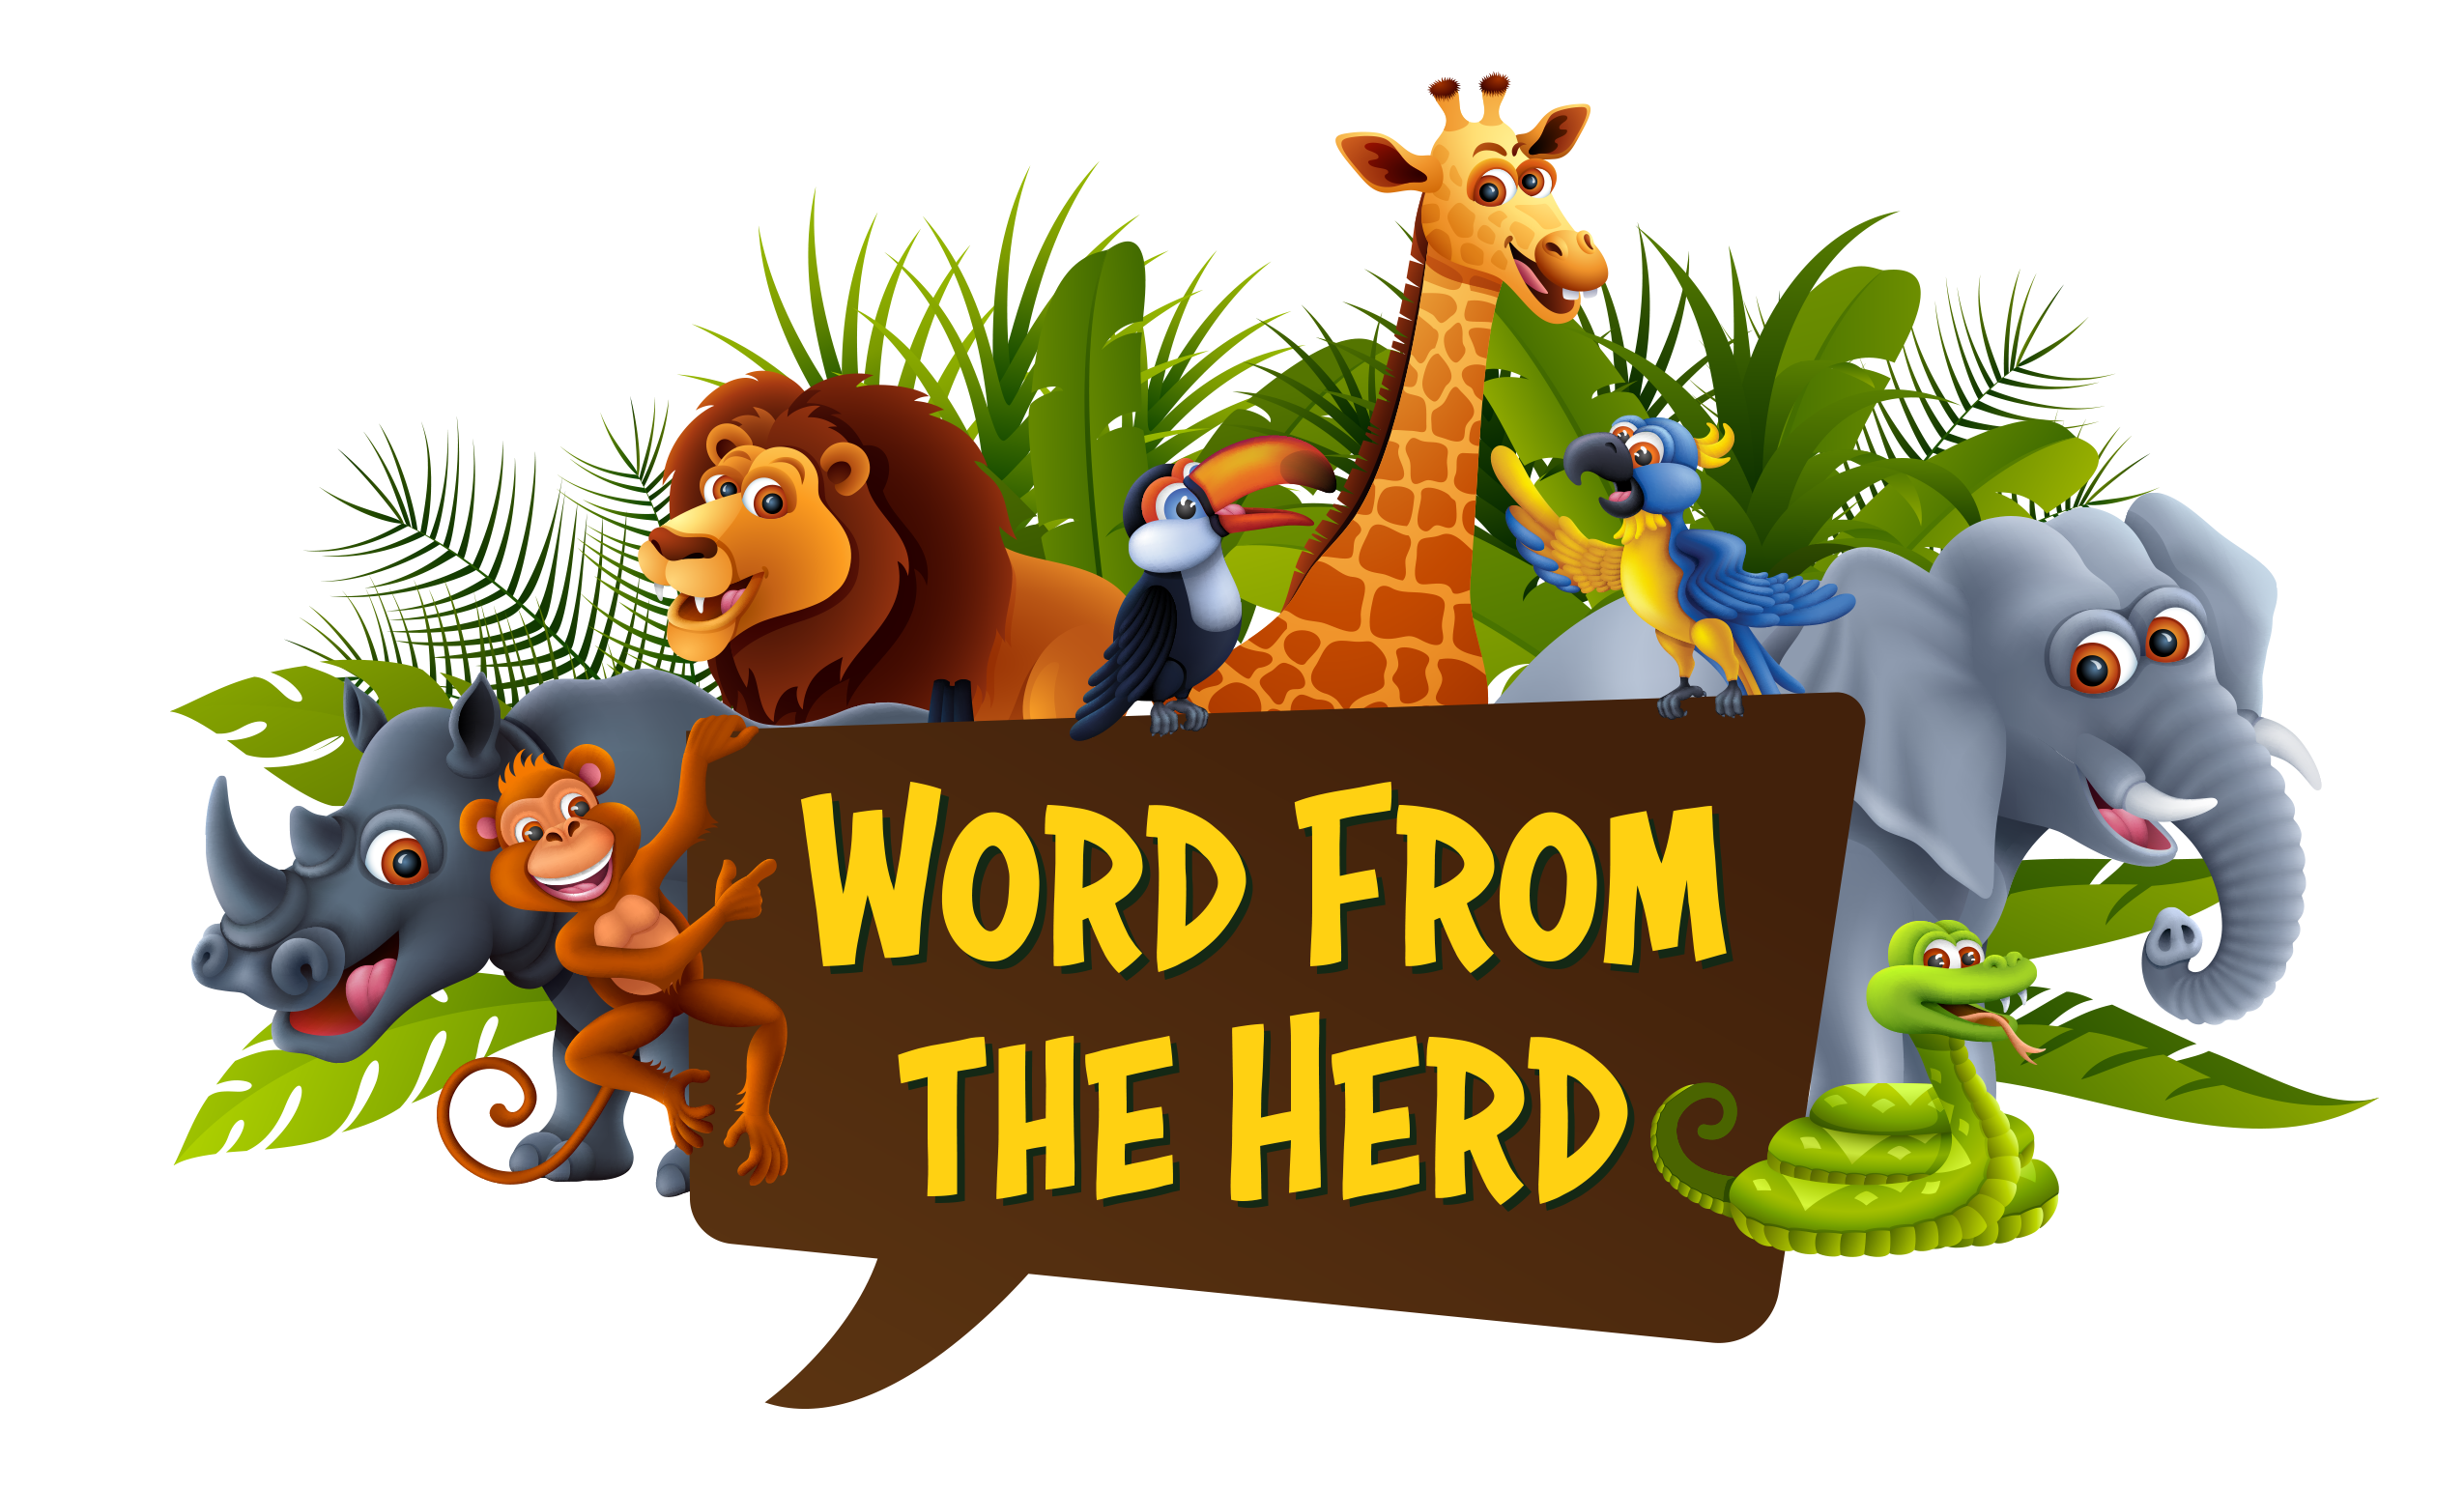 Word from the Herd - Fresno Chaffee Zoo